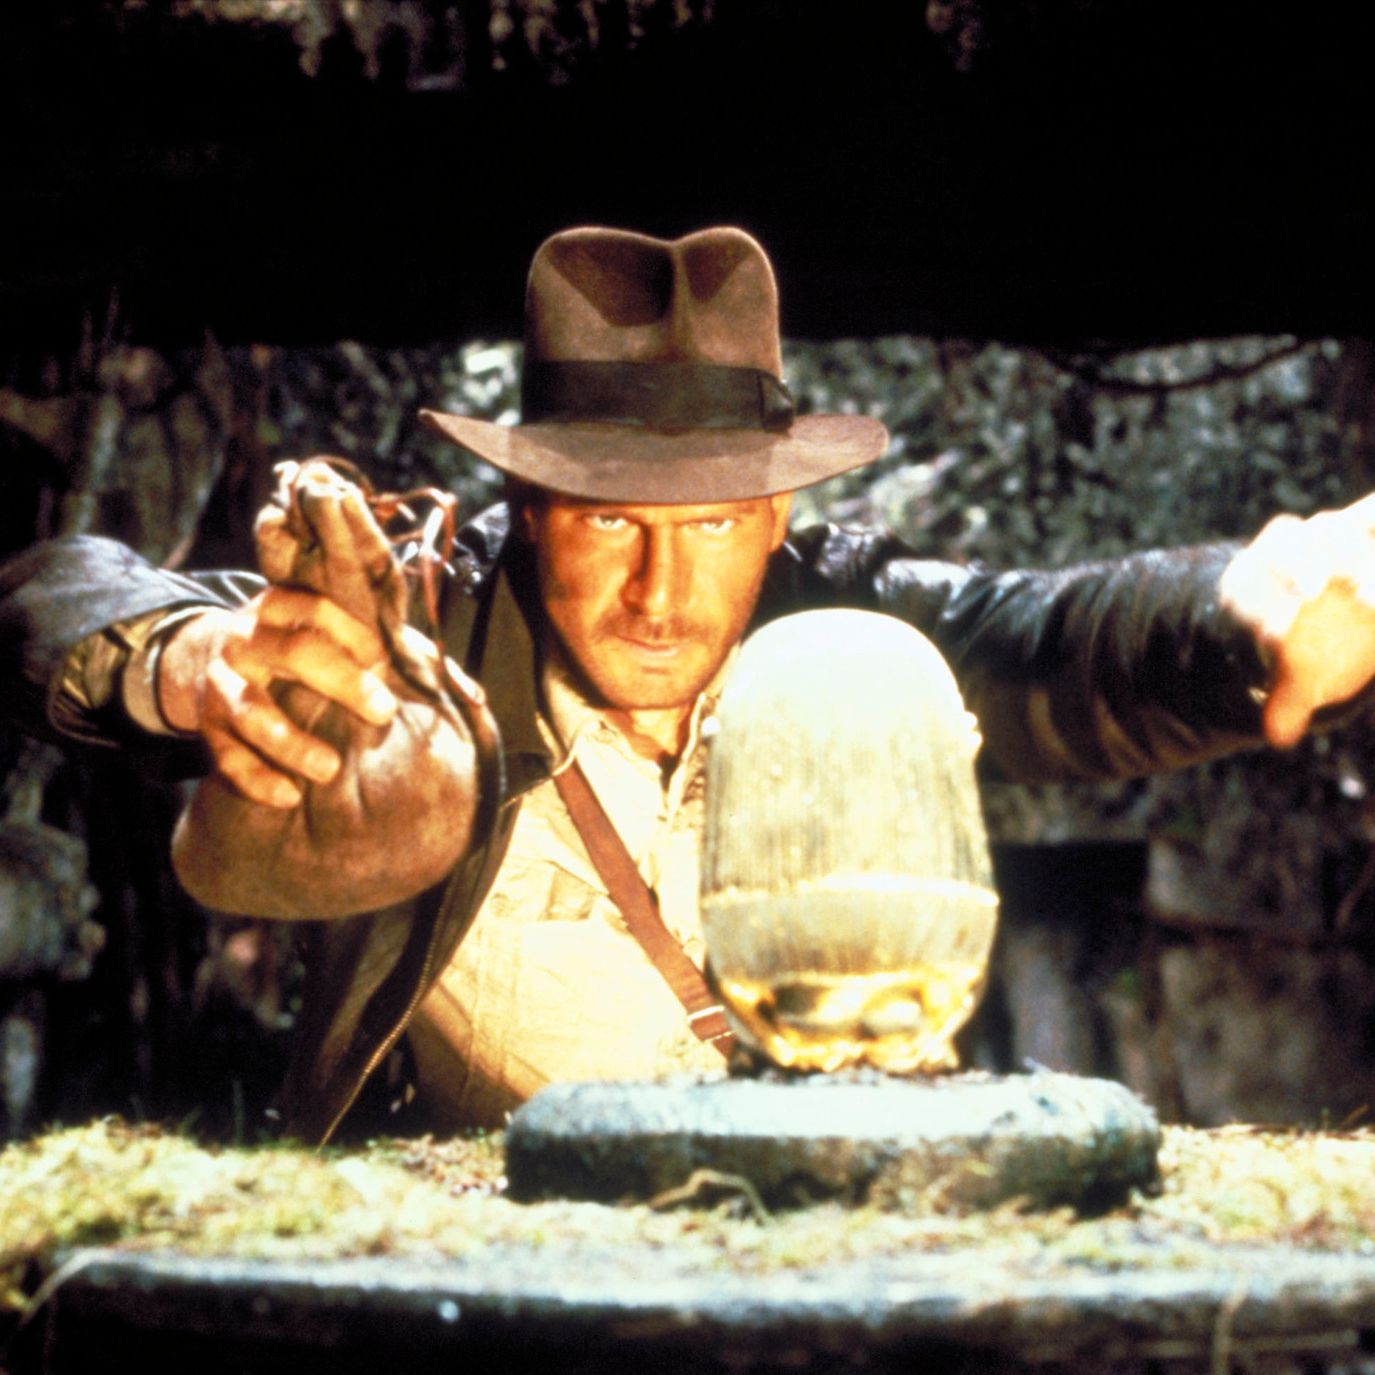 Indiana Jones 5 plummets as franchise's lowest-rated film on